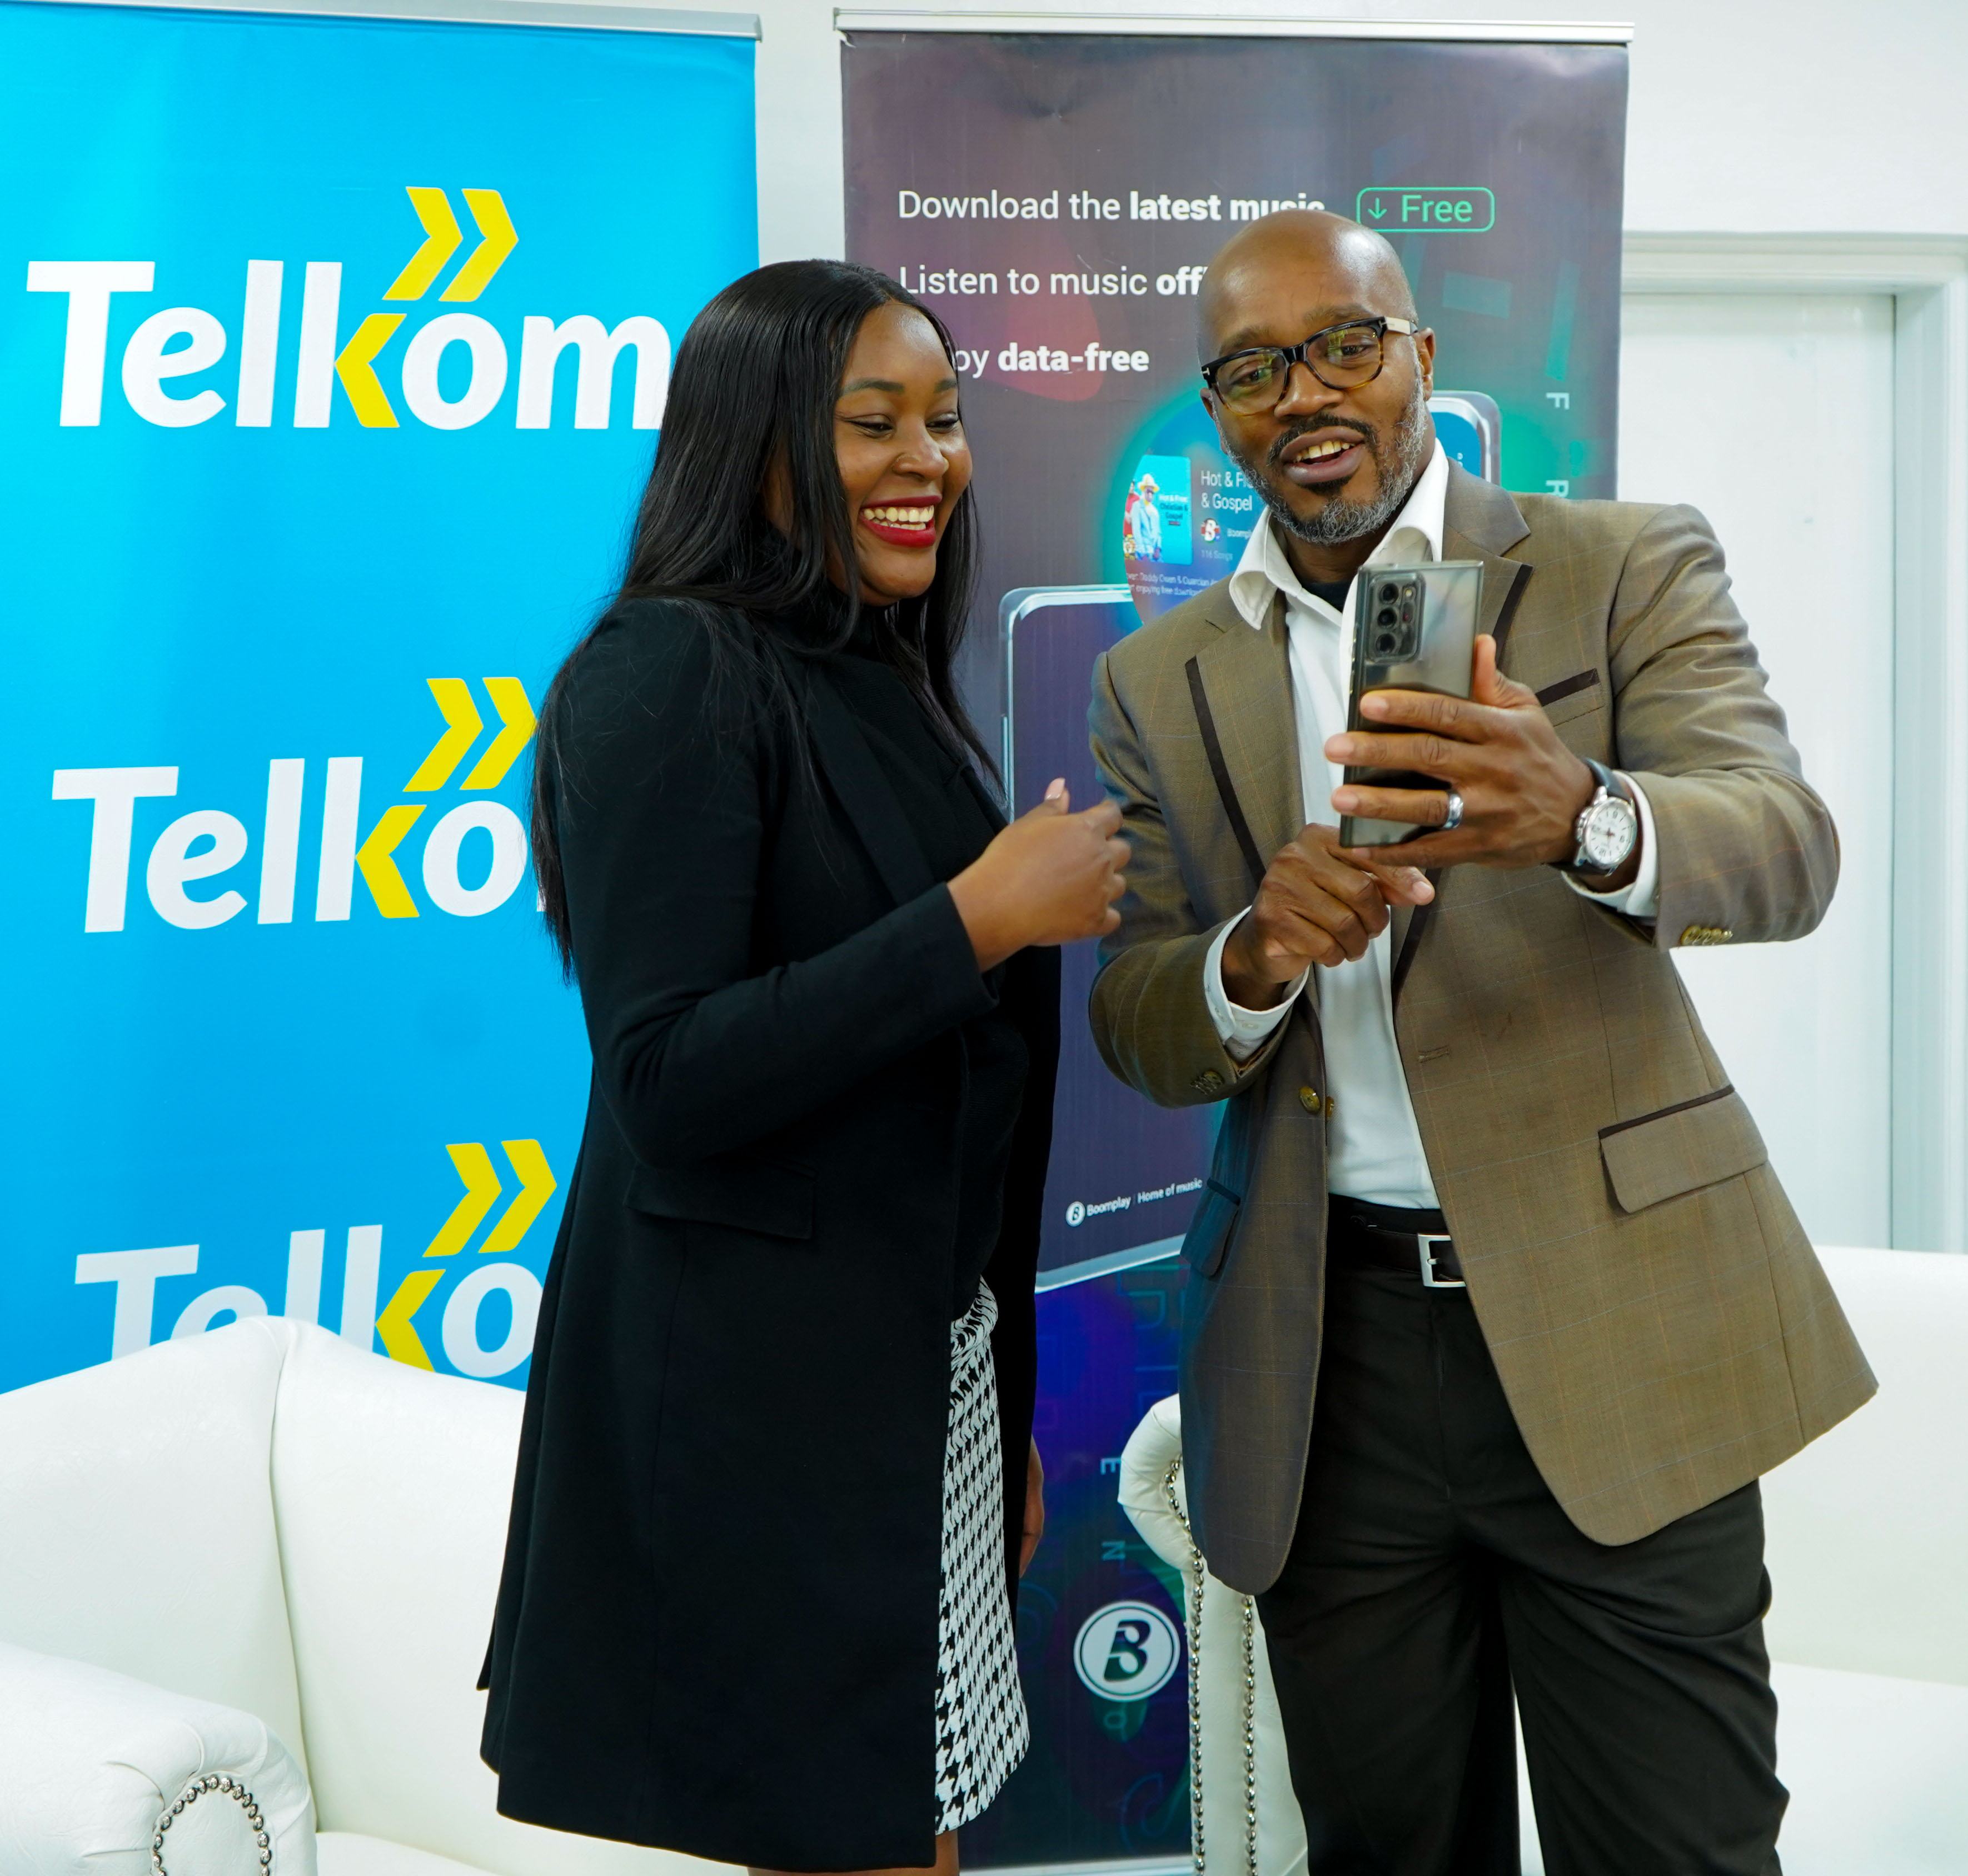 For as Low as Ksh 299 p/m, You Can Now Stream Millions of Songs From Boomplay on Your Telkom Line